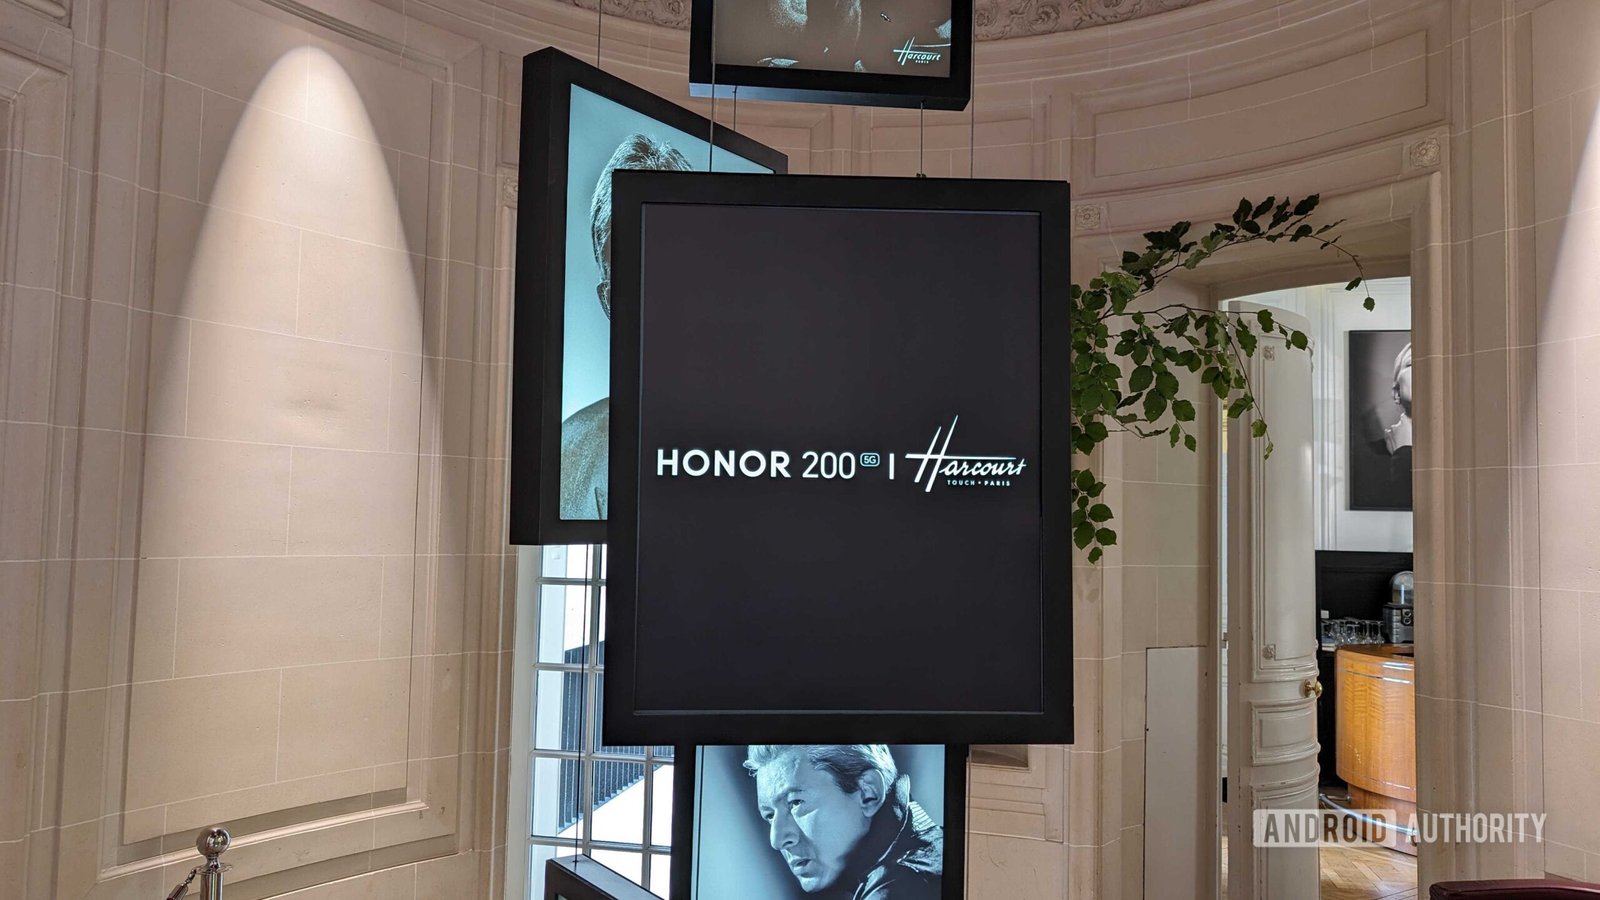 Honor 200 series will bring an iconic French studio’s photography expertise